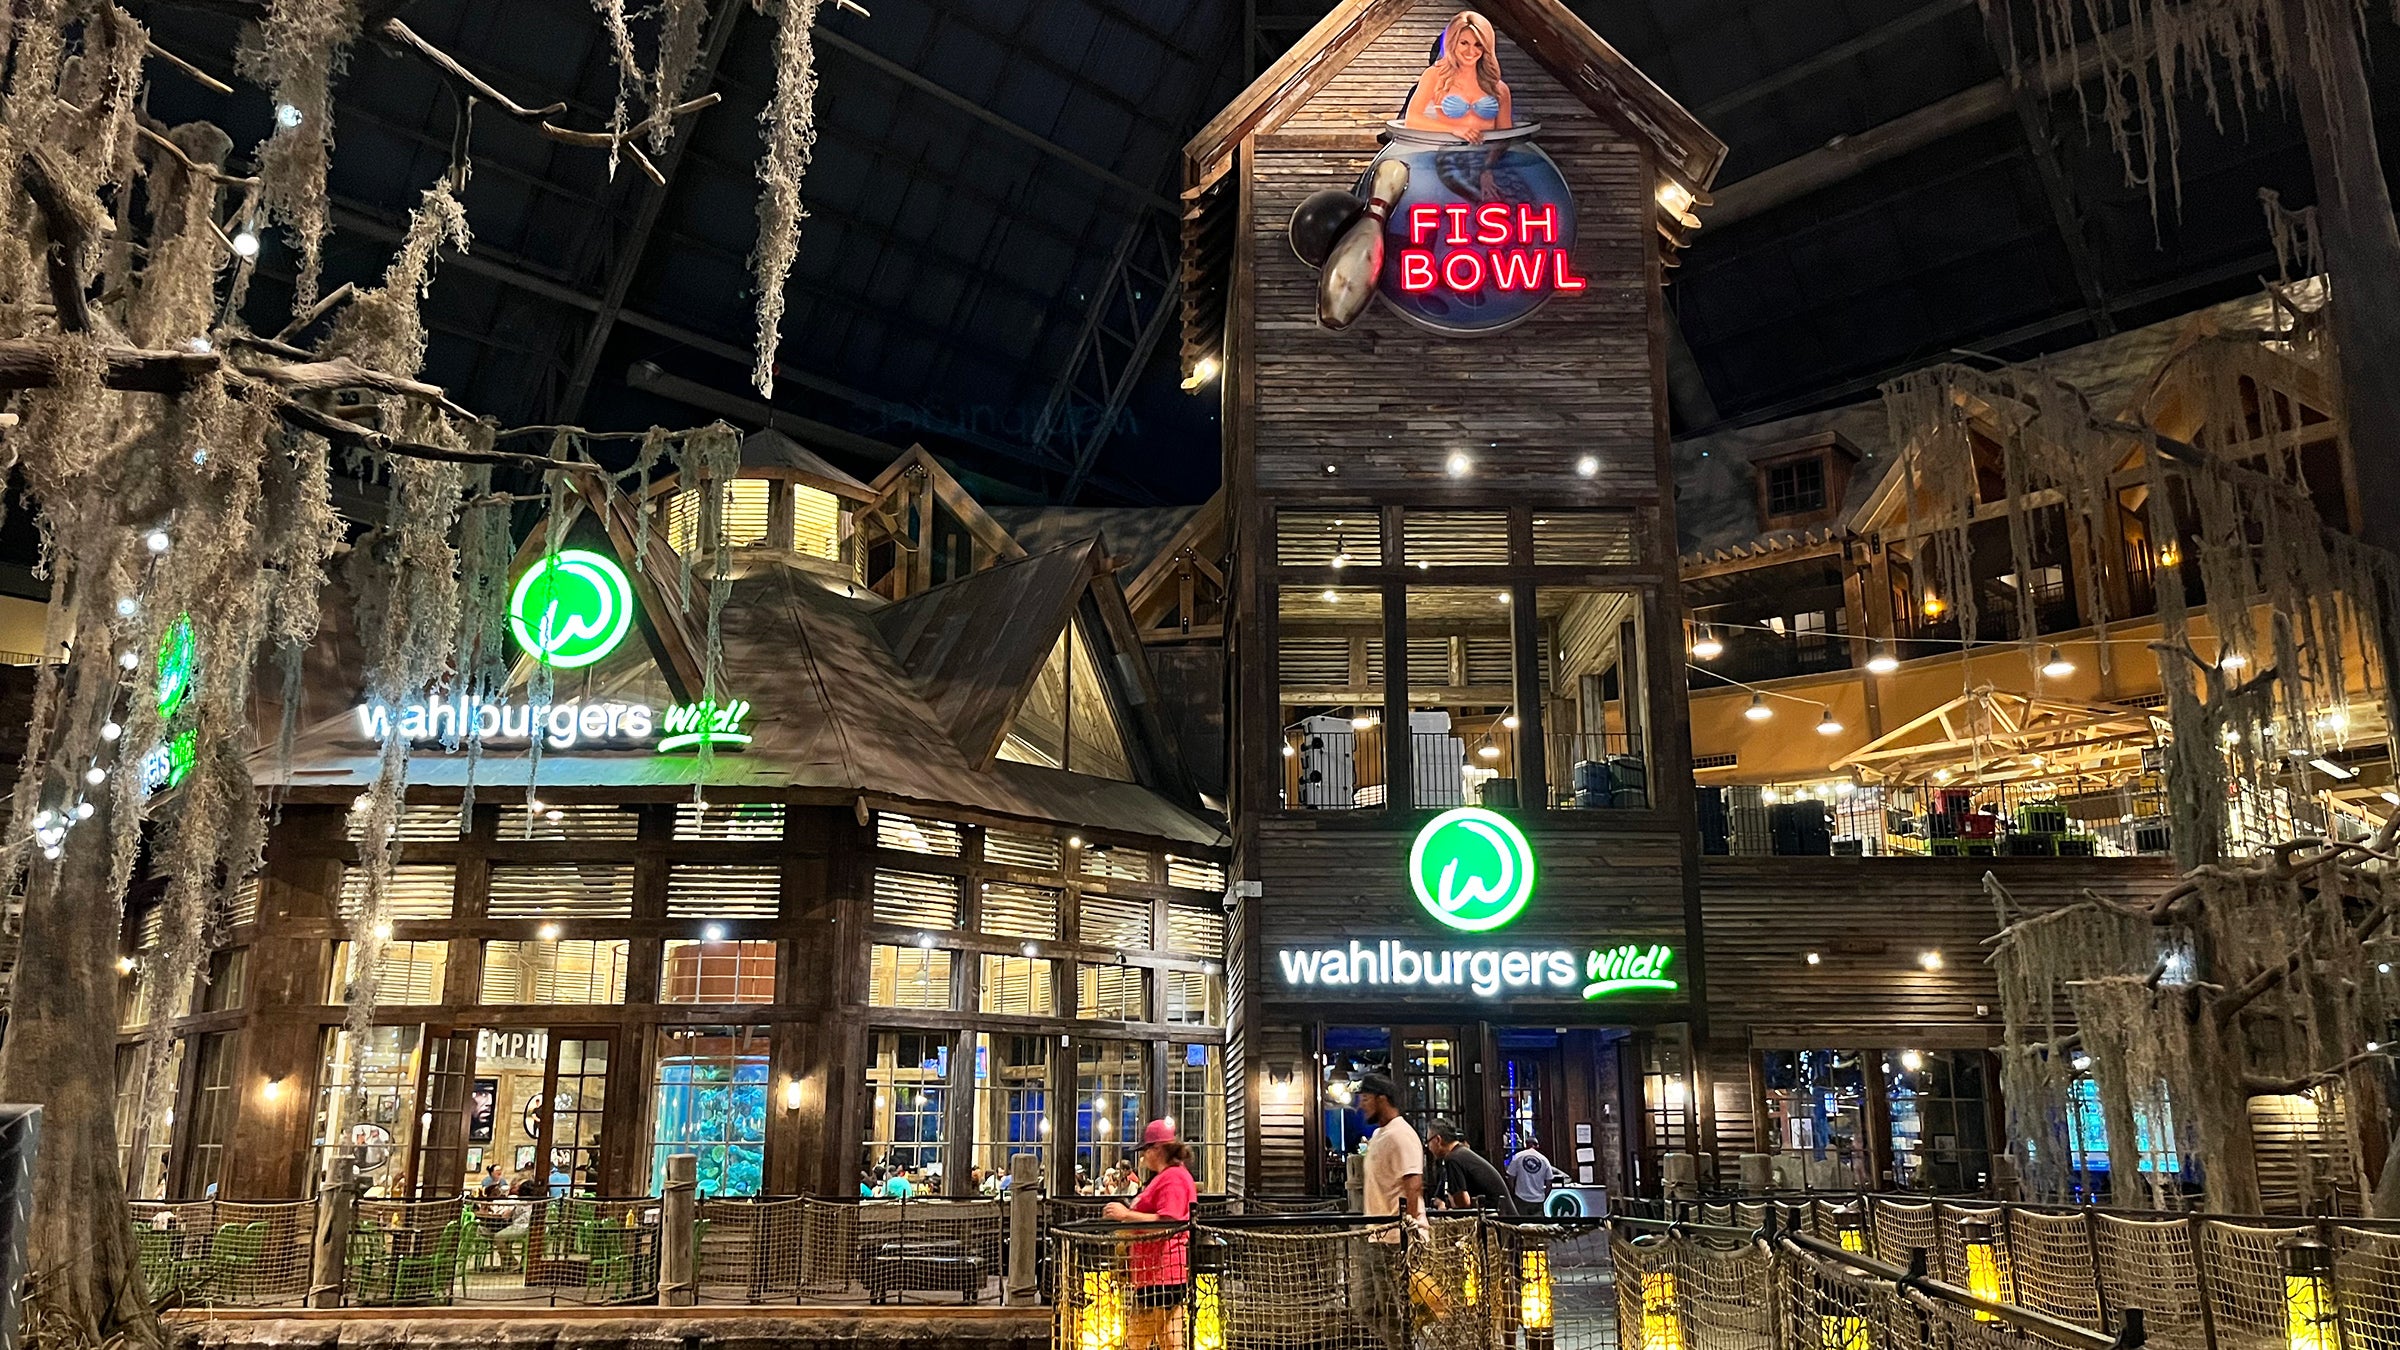 Bass Pro Shops - It's been a great day in Memphis, we'd like to